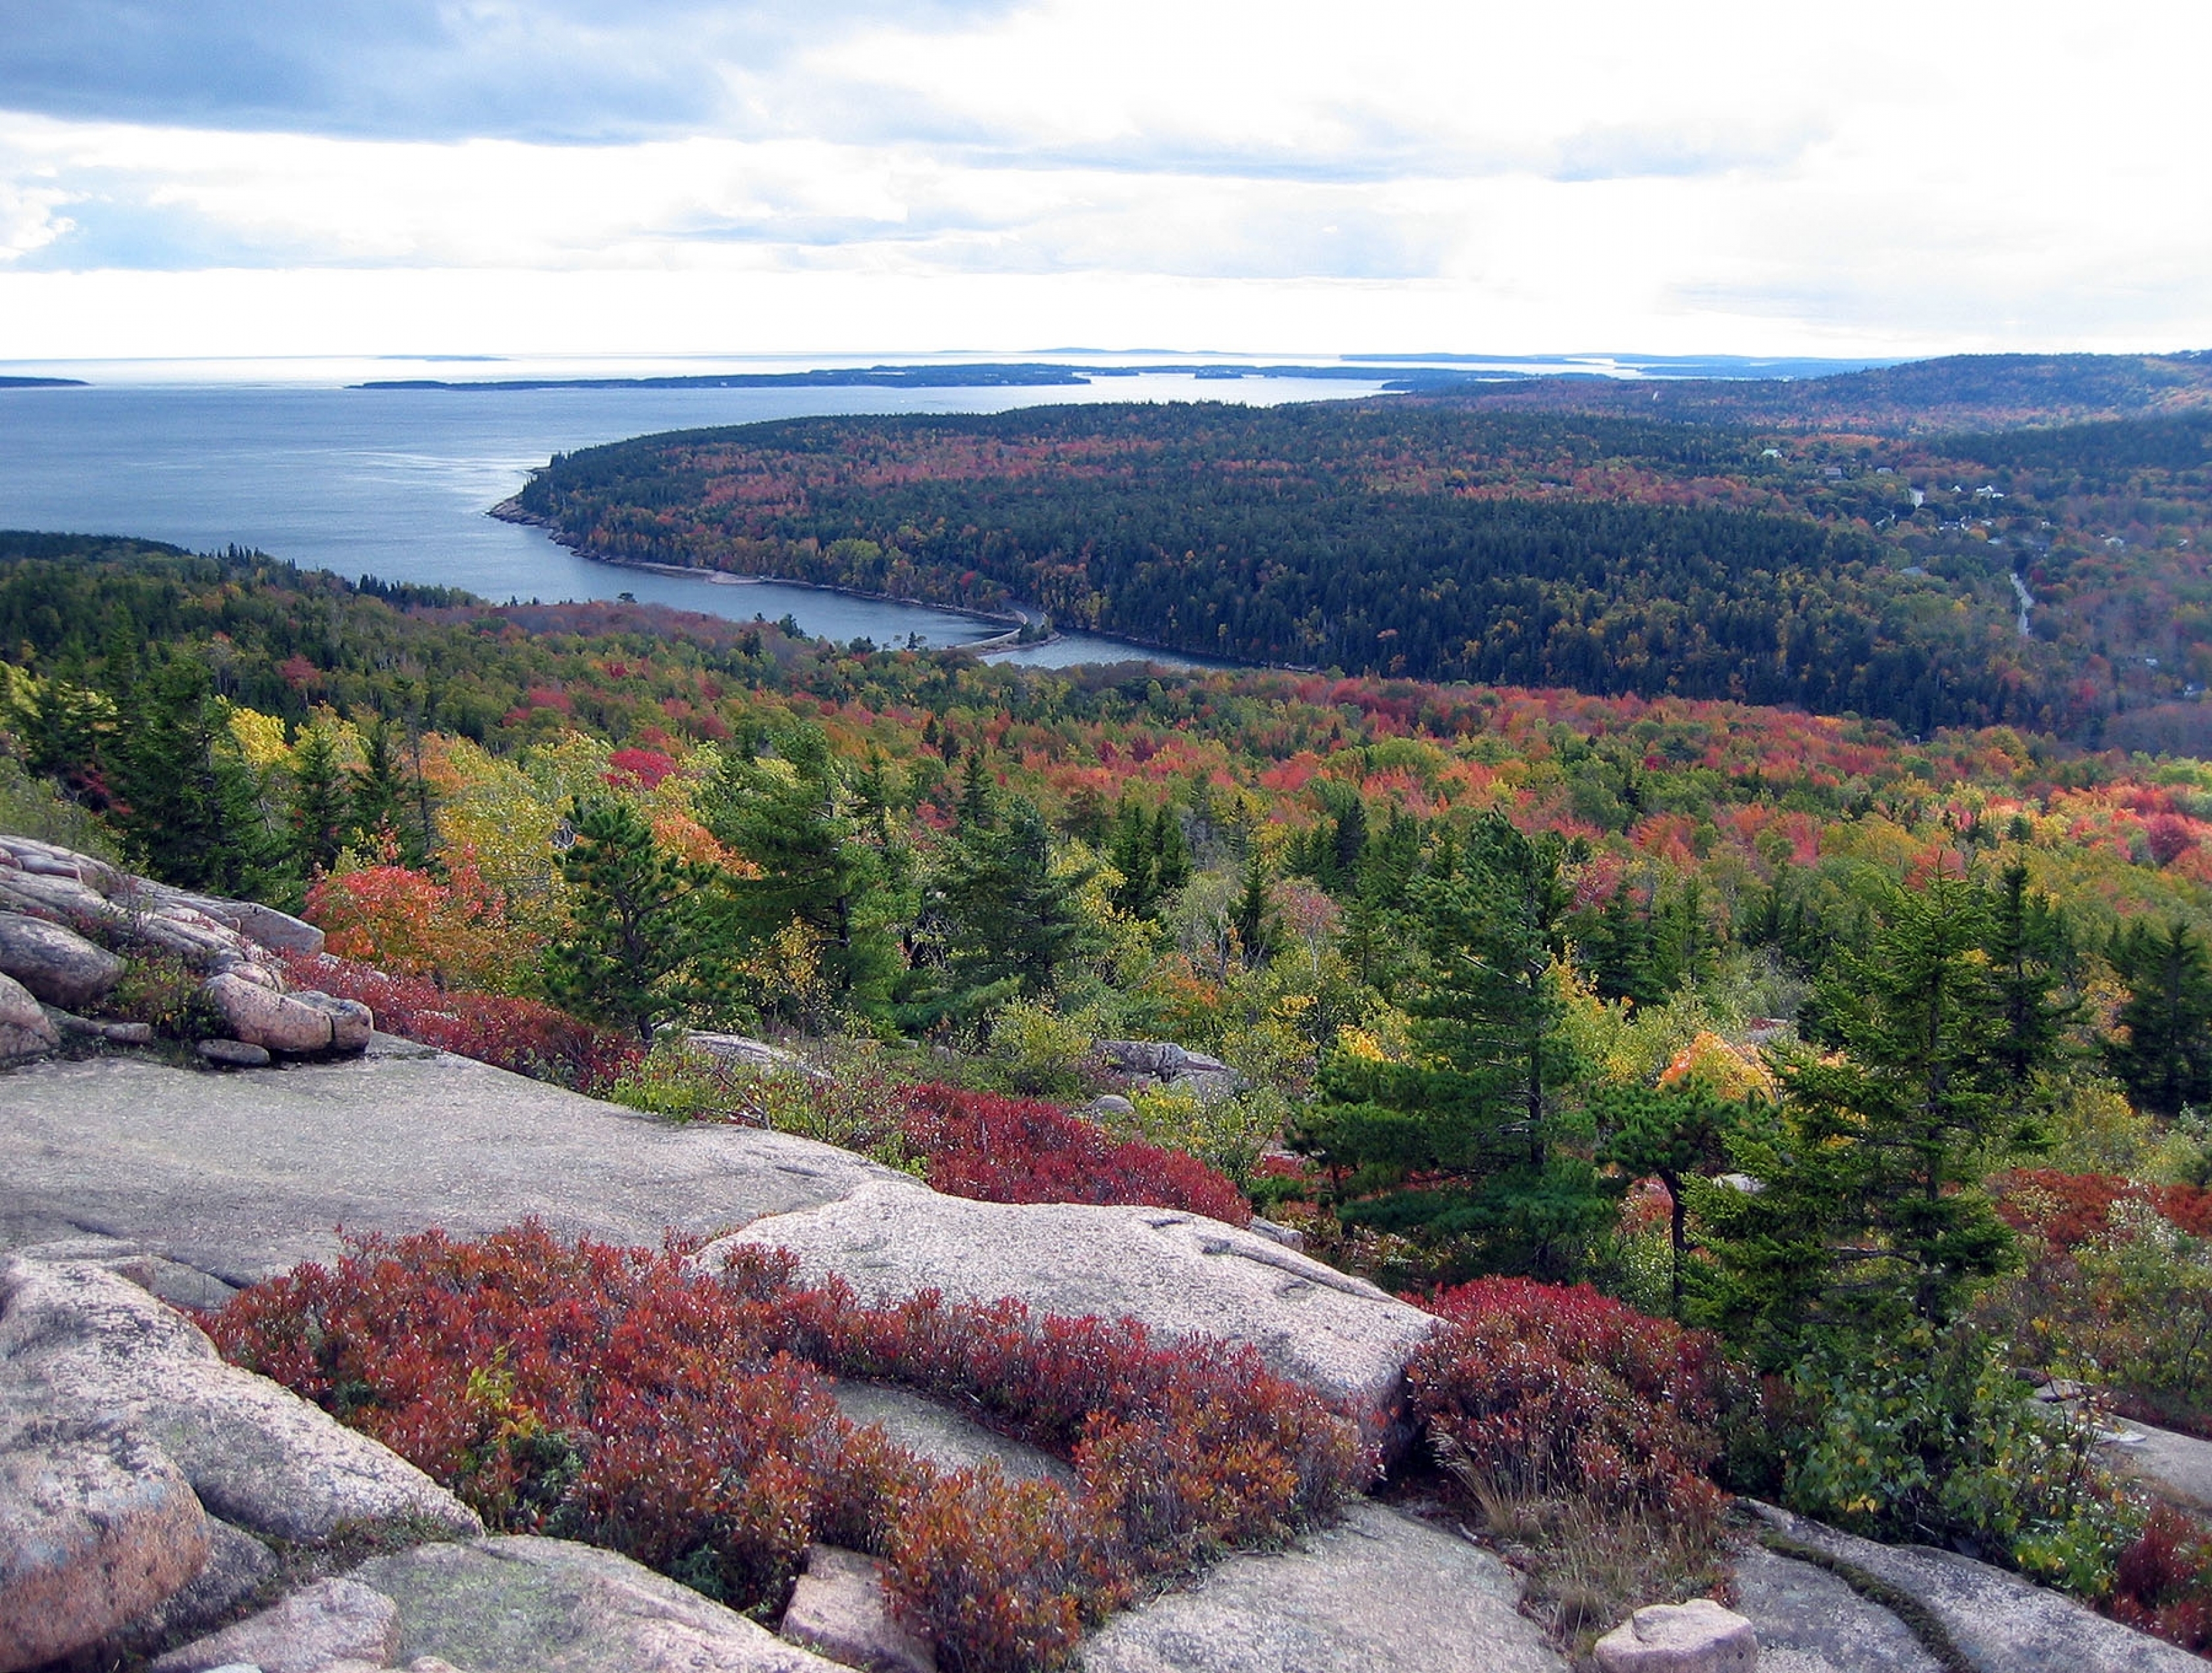 View from on top of Gorham Mountain onto the ocean and forest of green, reds, and yellows, at Acadia National Park